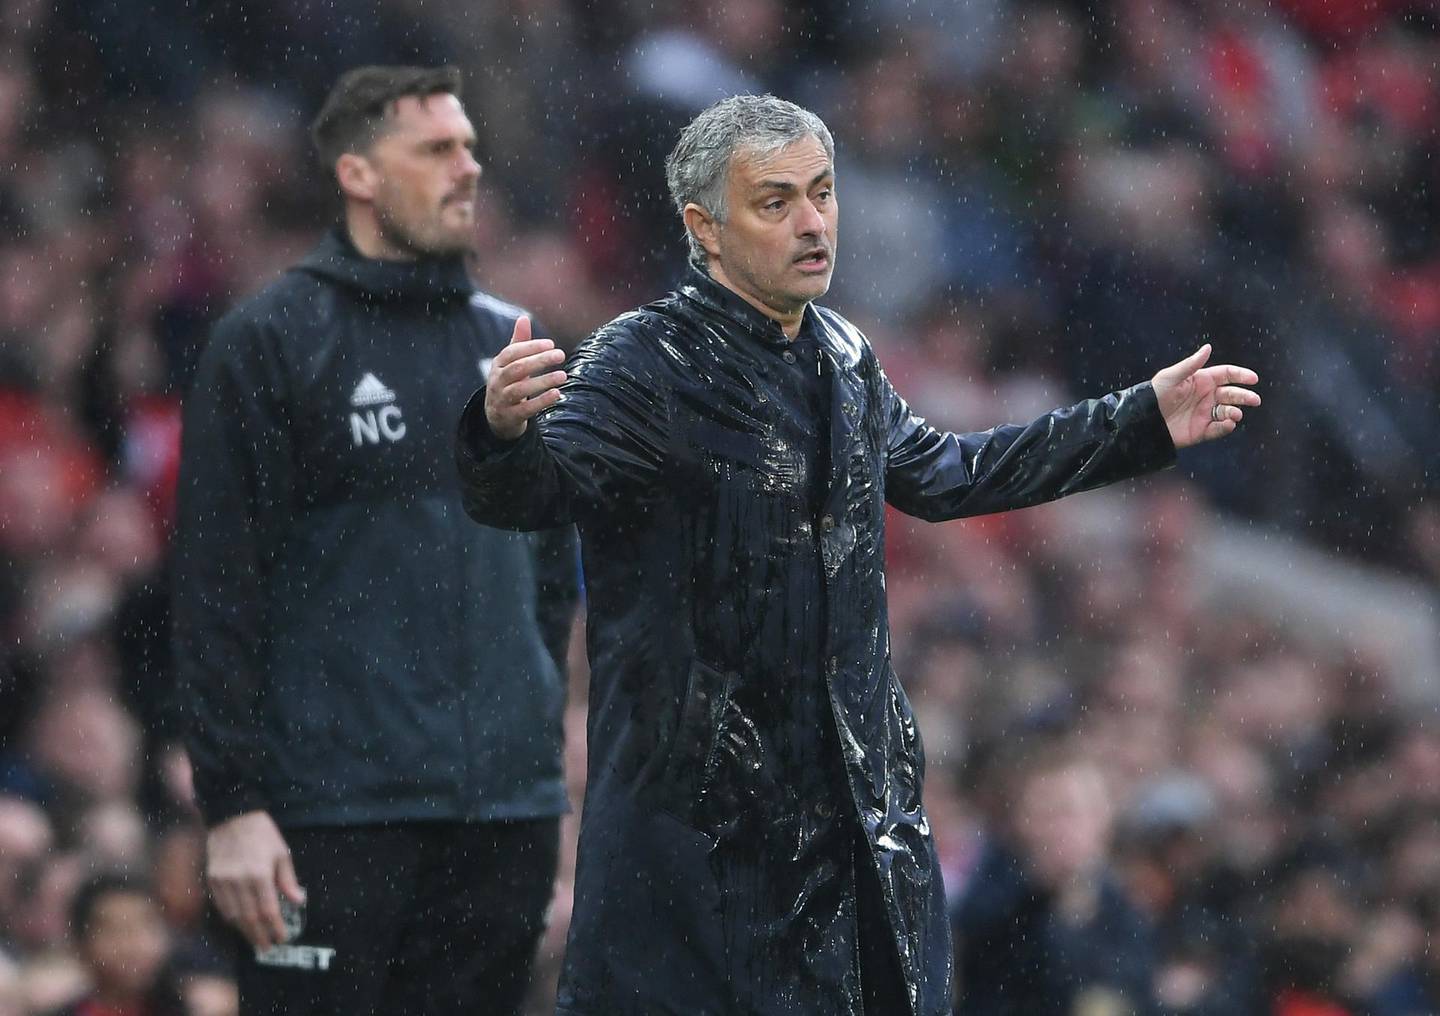 MANCHESTER, ENGLAND - APRIL 15:  Jose Mourinho, Manager of Manchester United reacts during the Premier League match between Manchester United and West Bromwich Albion at Old Trafford on April 15, 2018 in Manchester, England.  (Photo by Laurence Griffiths/Getty Images)